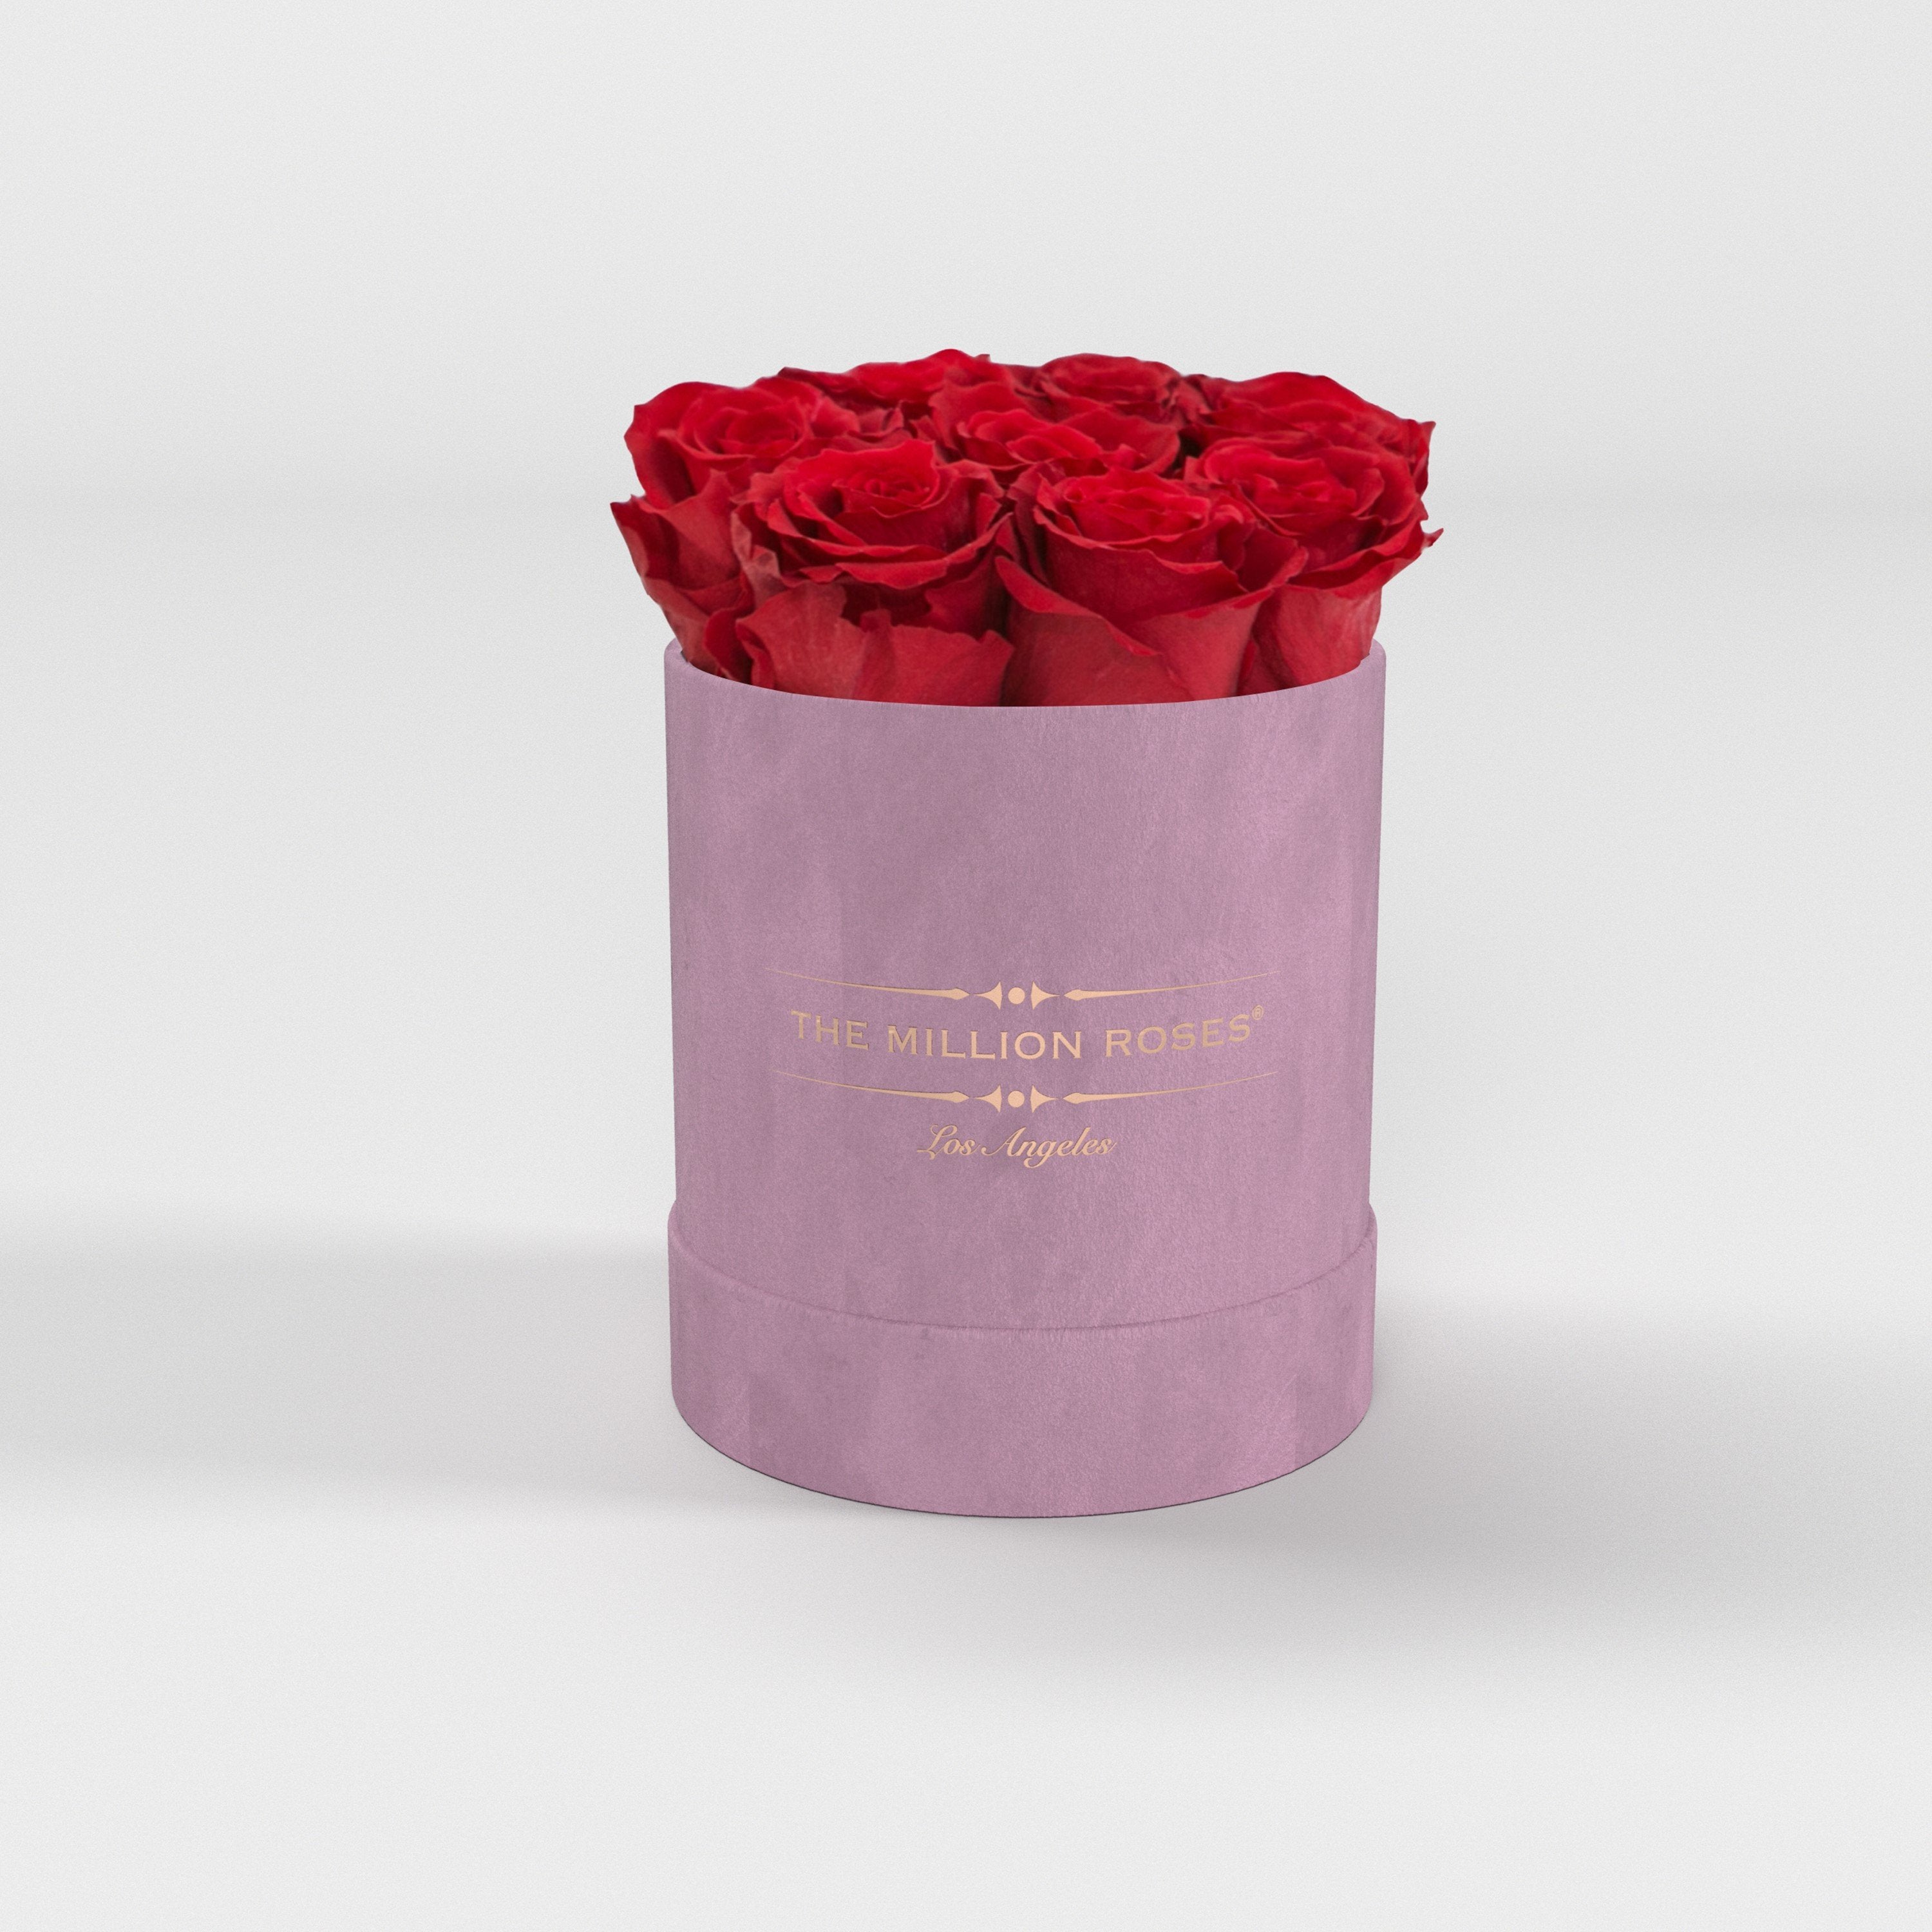 ( LA ) Light Pink - Suede - Basic Box with Red Roses Kit - the million roses